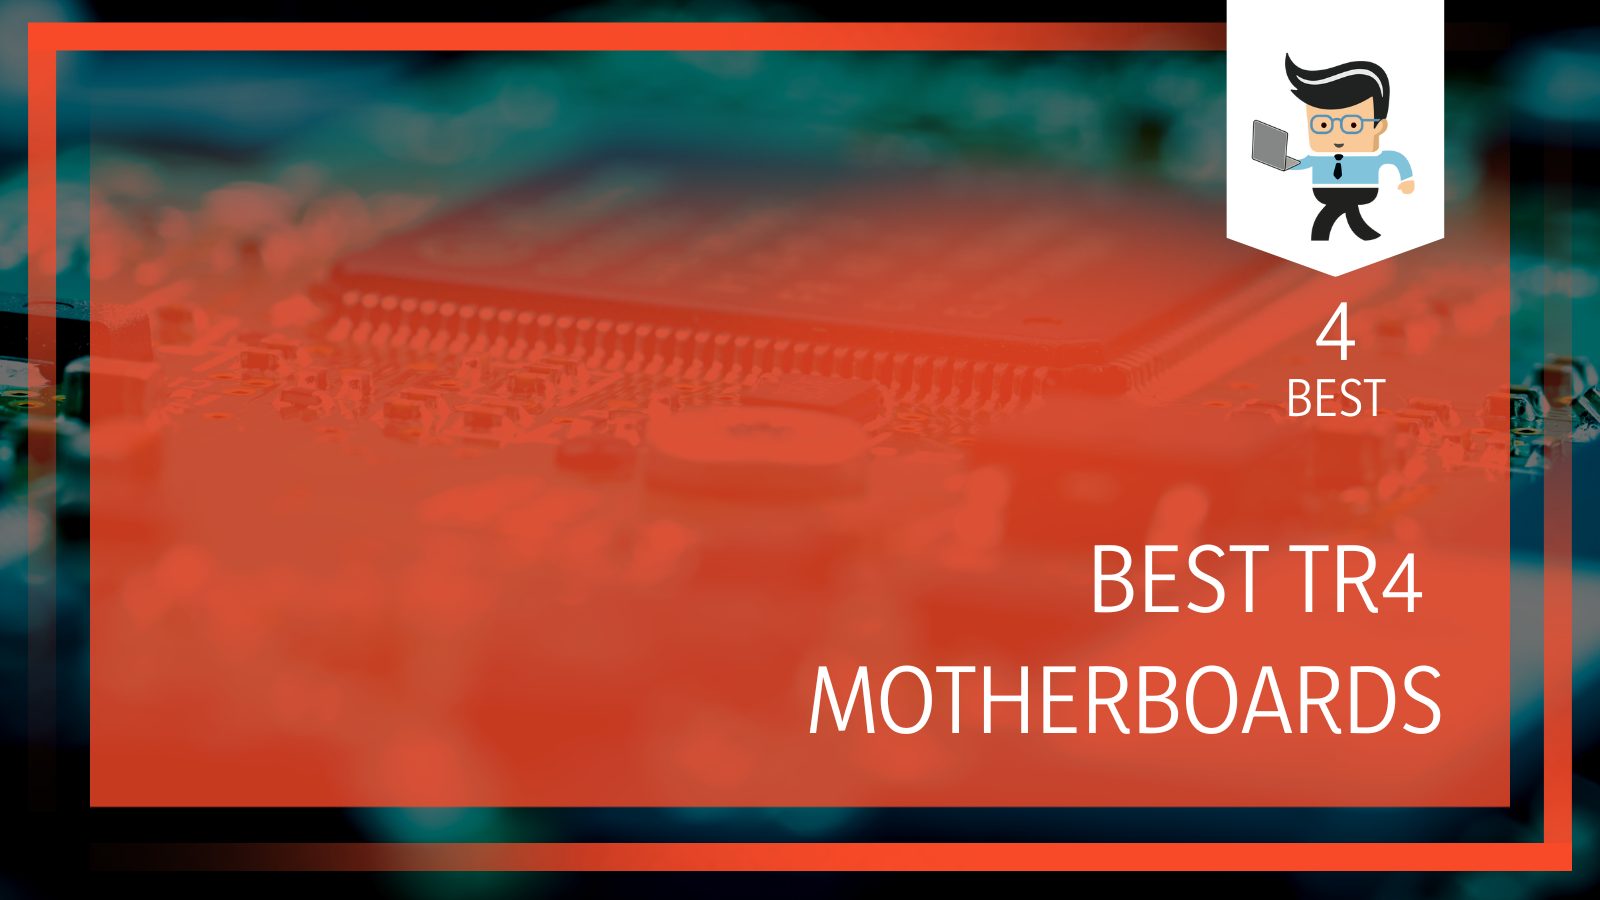 Best TR4 Motherboards Specification